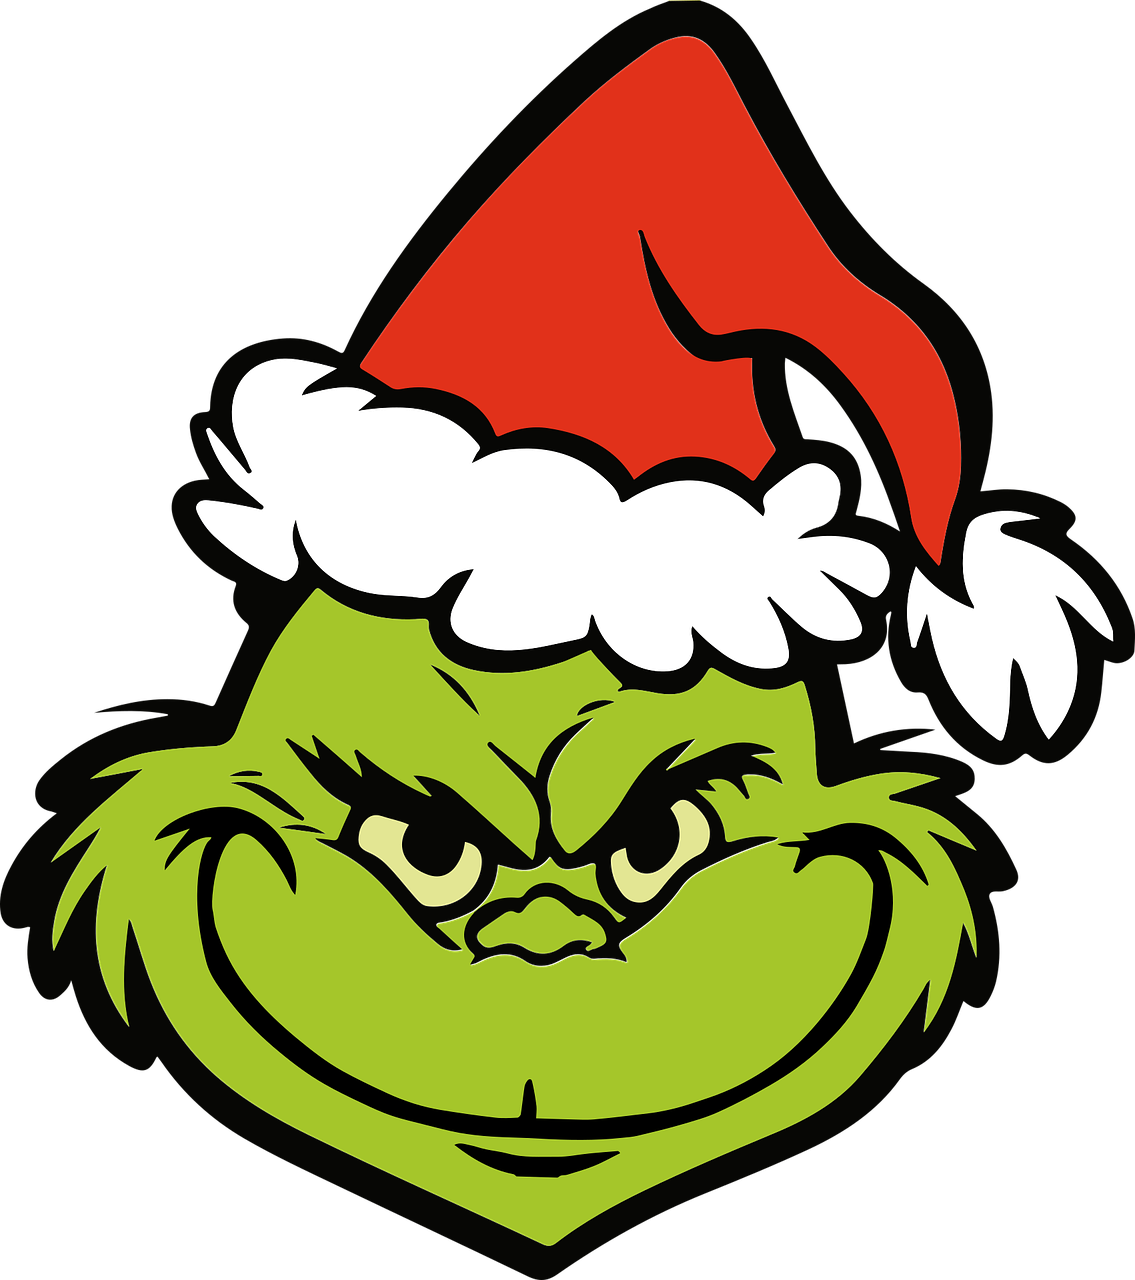 Why is the Grinch green? 